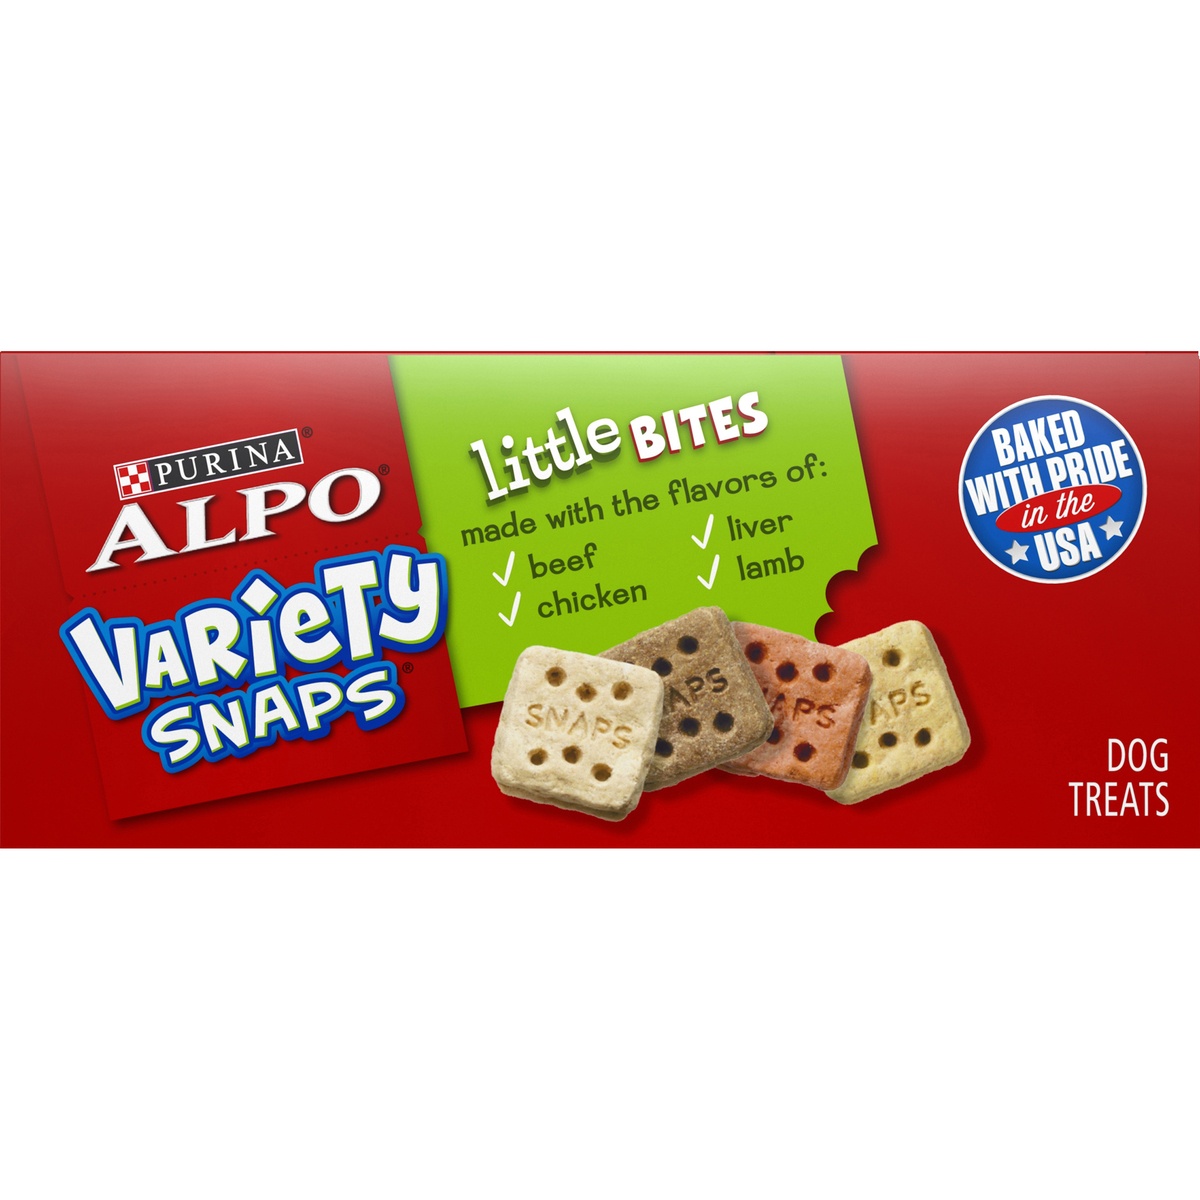 slide 6 of 11, Purina ALPO Variety Snaps Little Bites Dog Treats with Beef, Chicken, Liver & Lamb Flavors, 32 oz